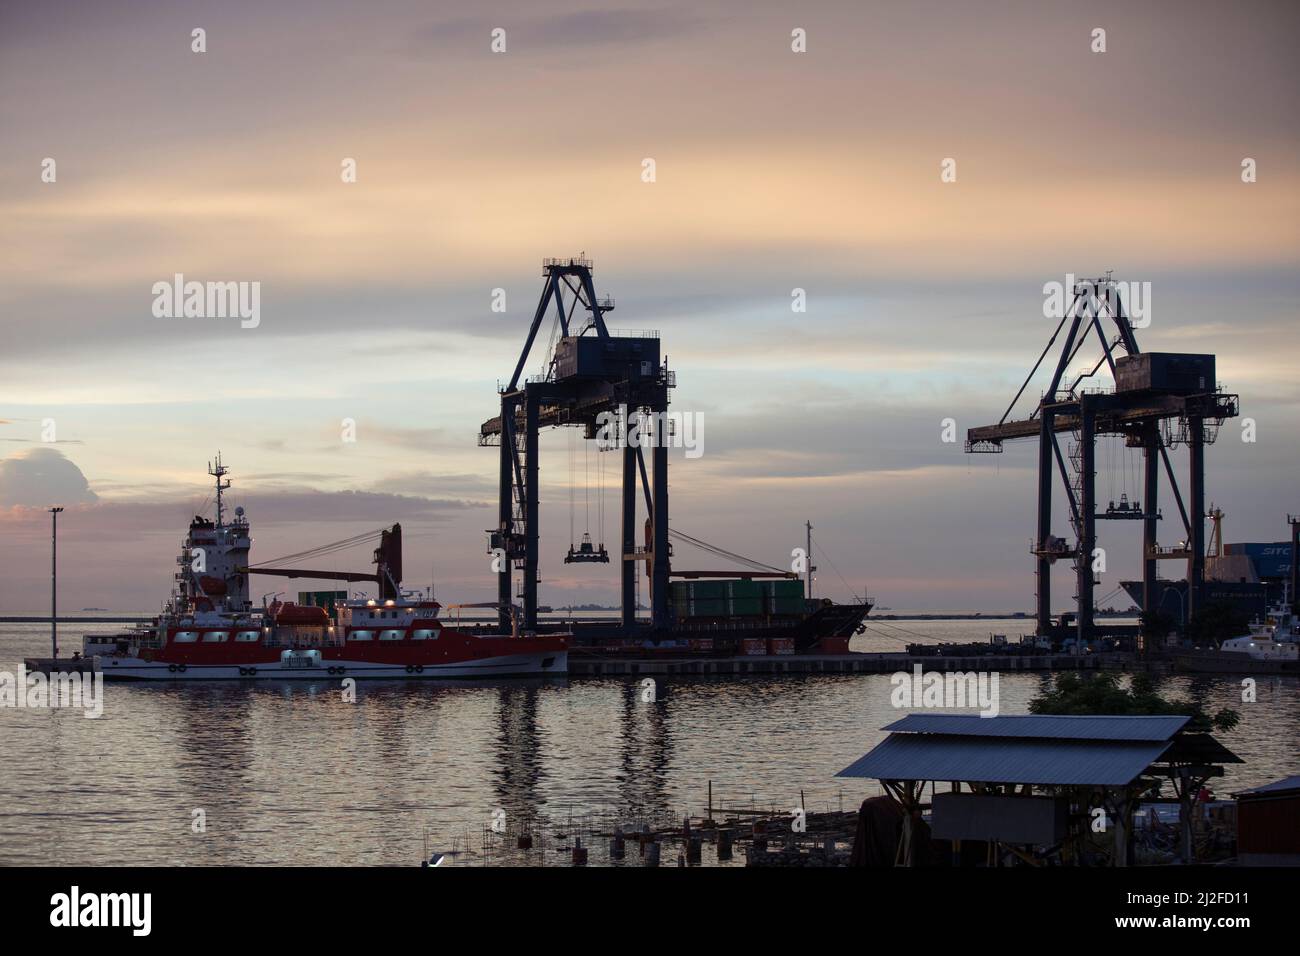 The evening sun sets over container cranes that stand at the port in Makassar, Indonesia. Stock Photo